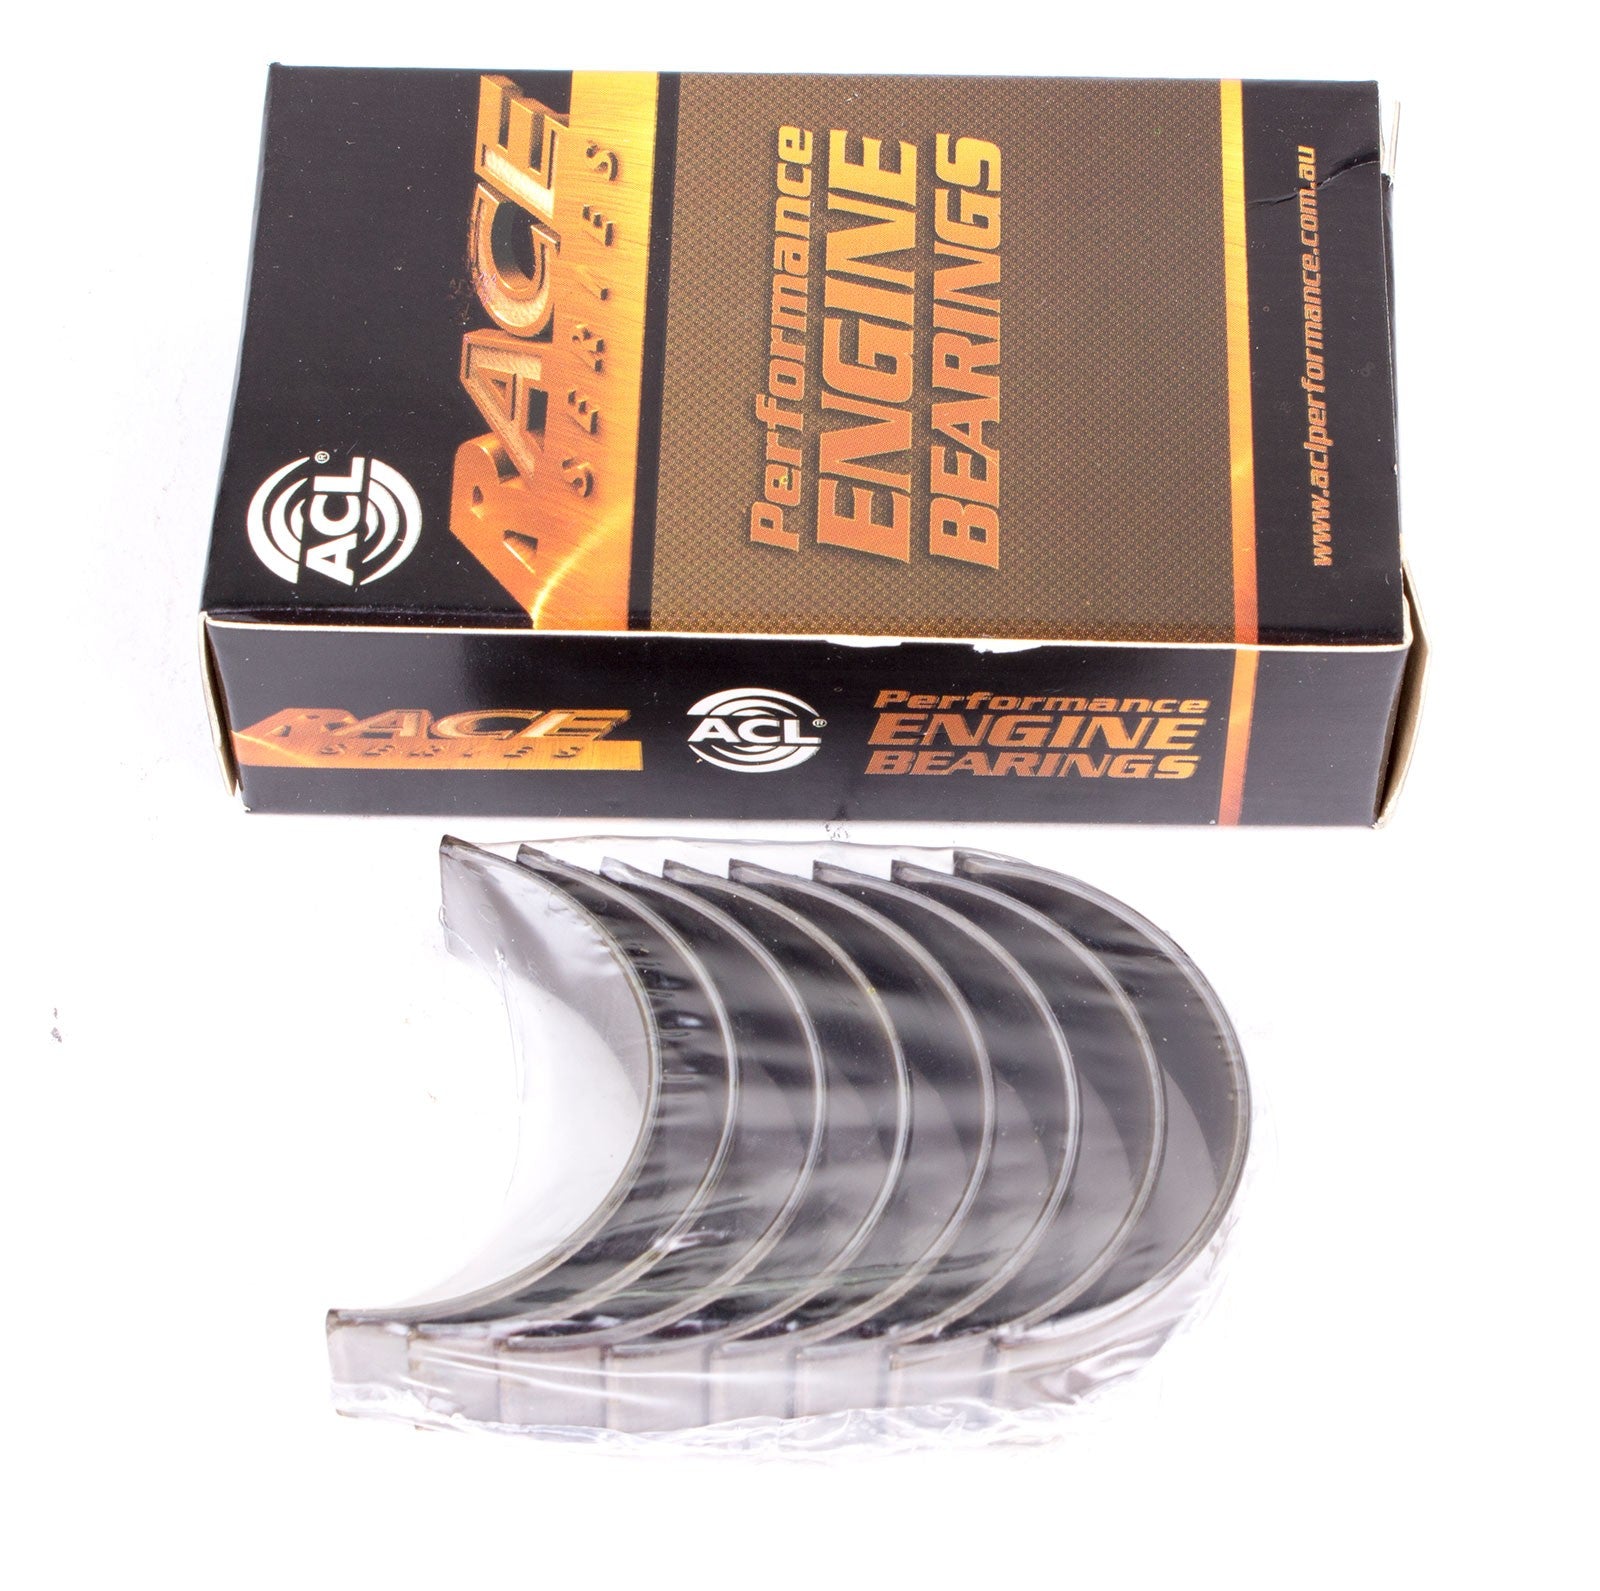 ACL 8B2356H-010 Con rod bearing set (ACL Race Series) Photo-0 